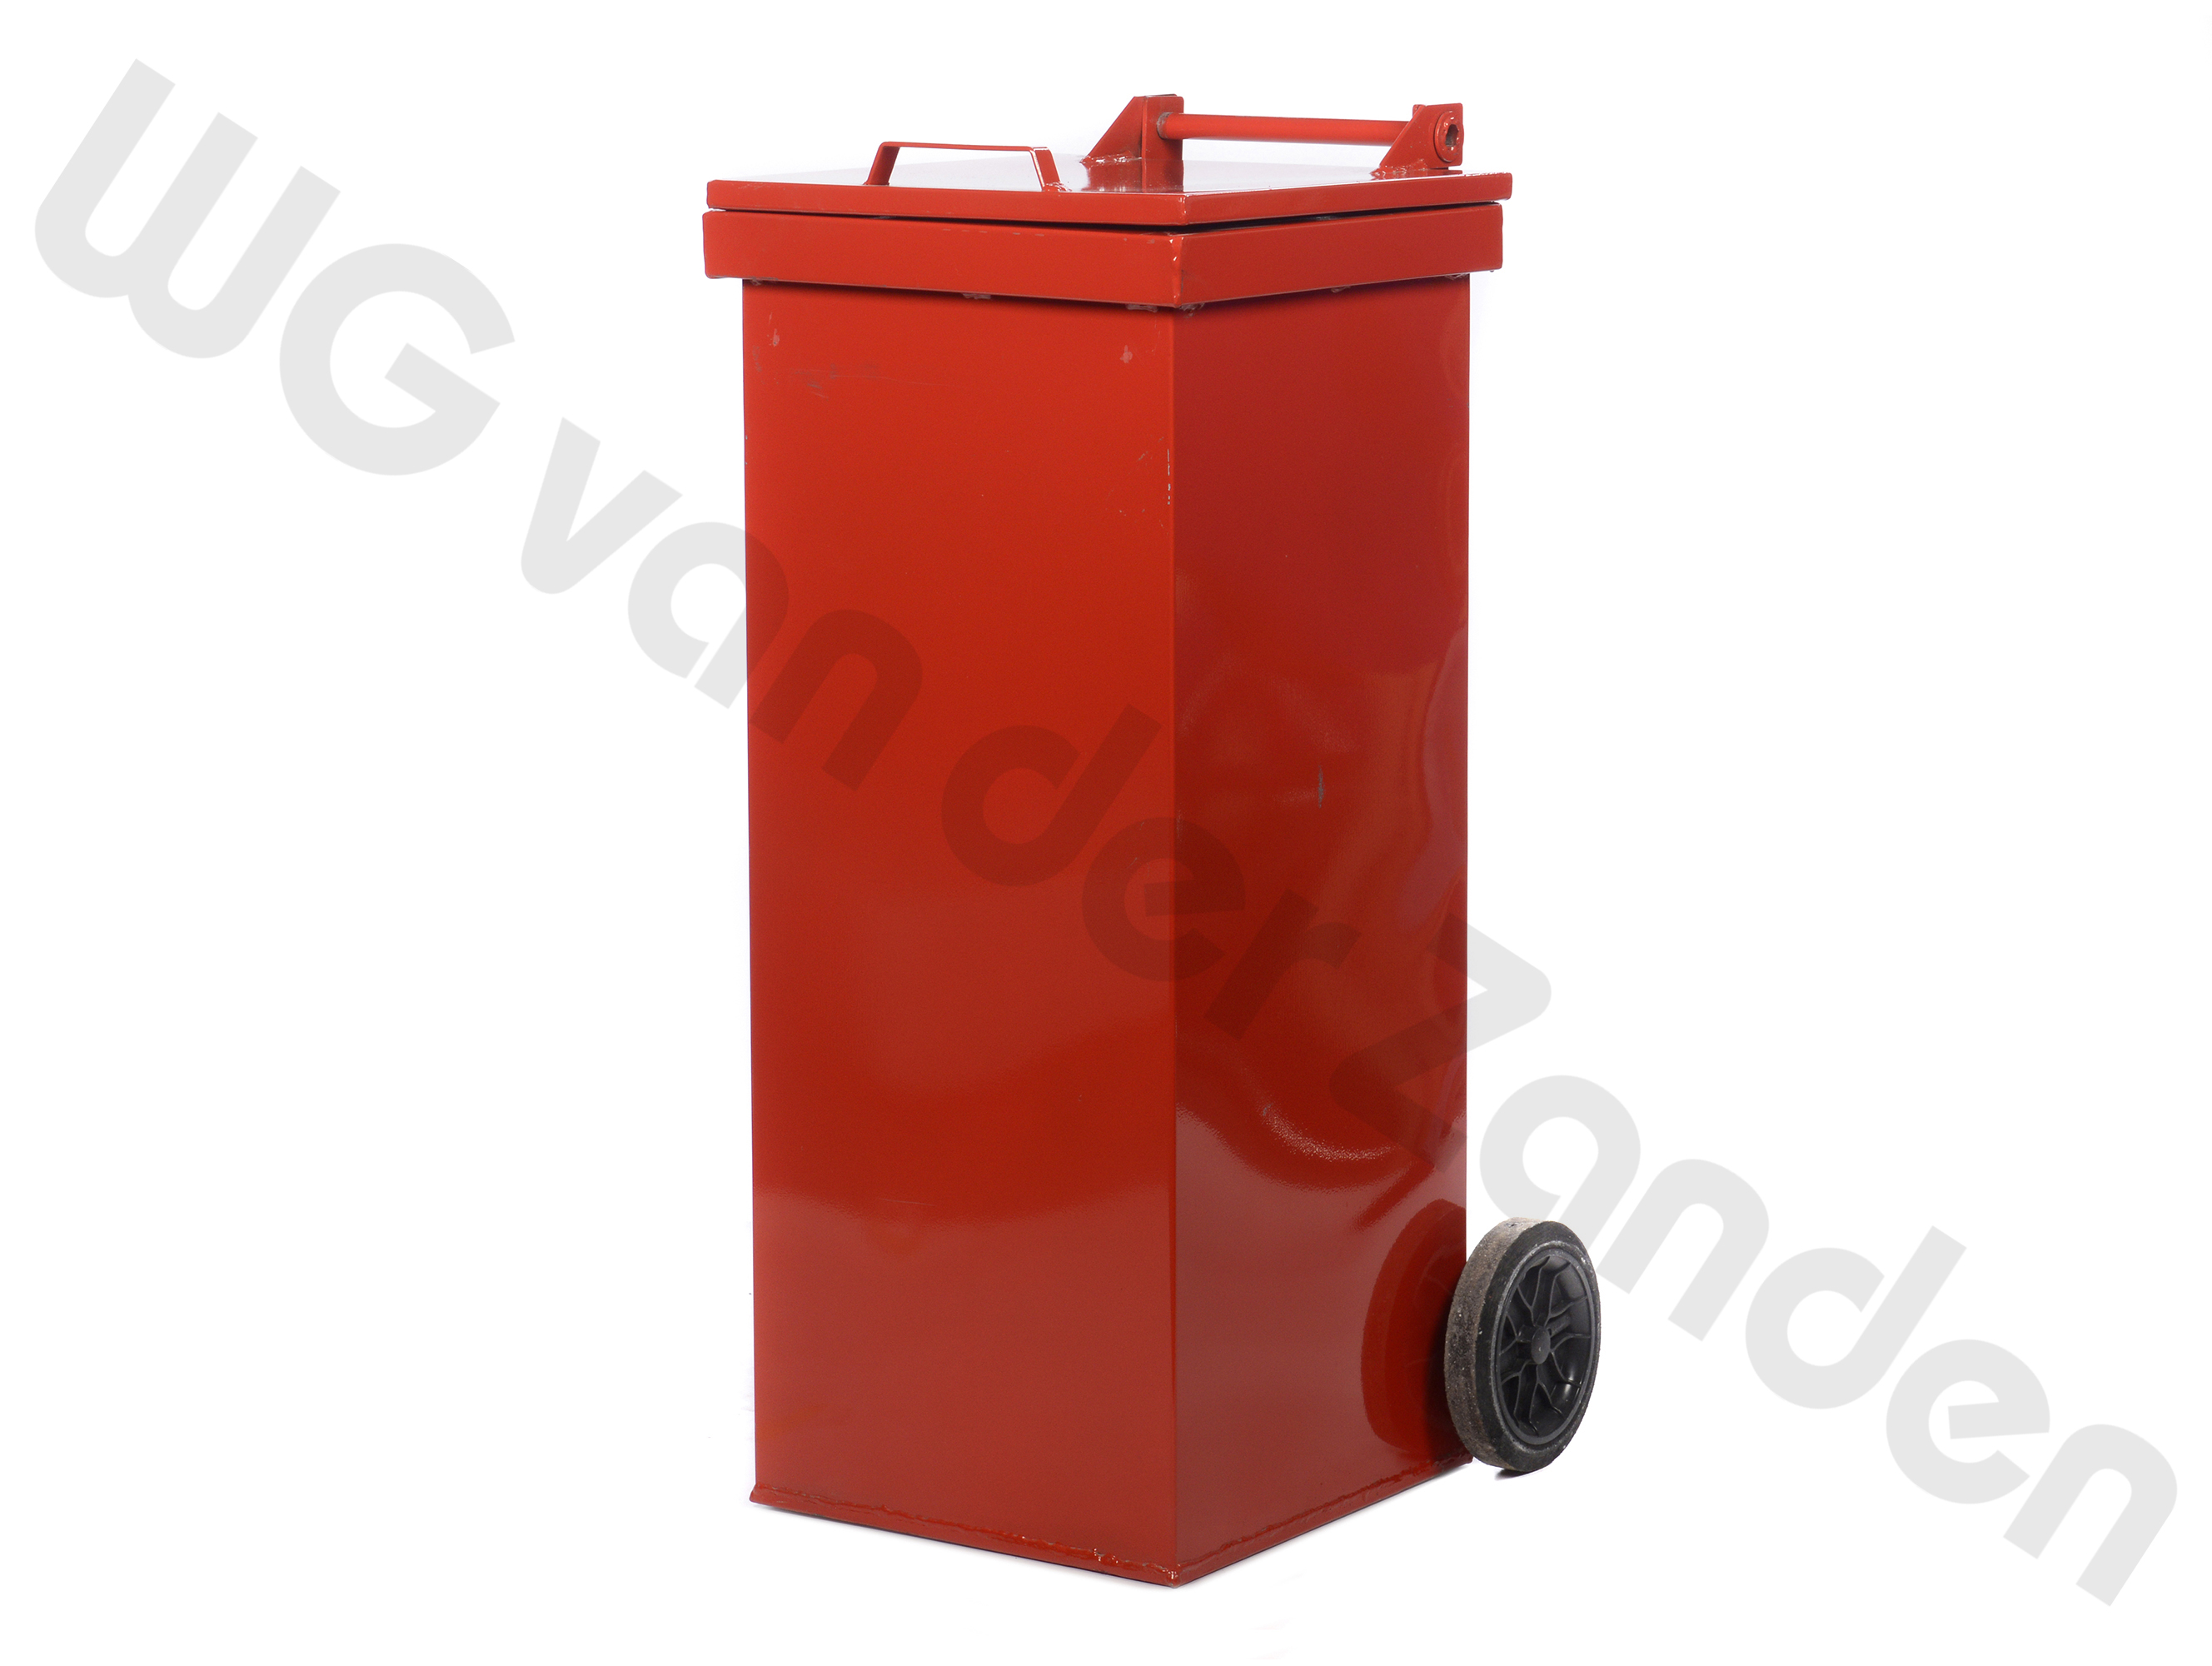 440069 AFVALCONTAINER 120 LTR METAAL M/WIEL ROOD